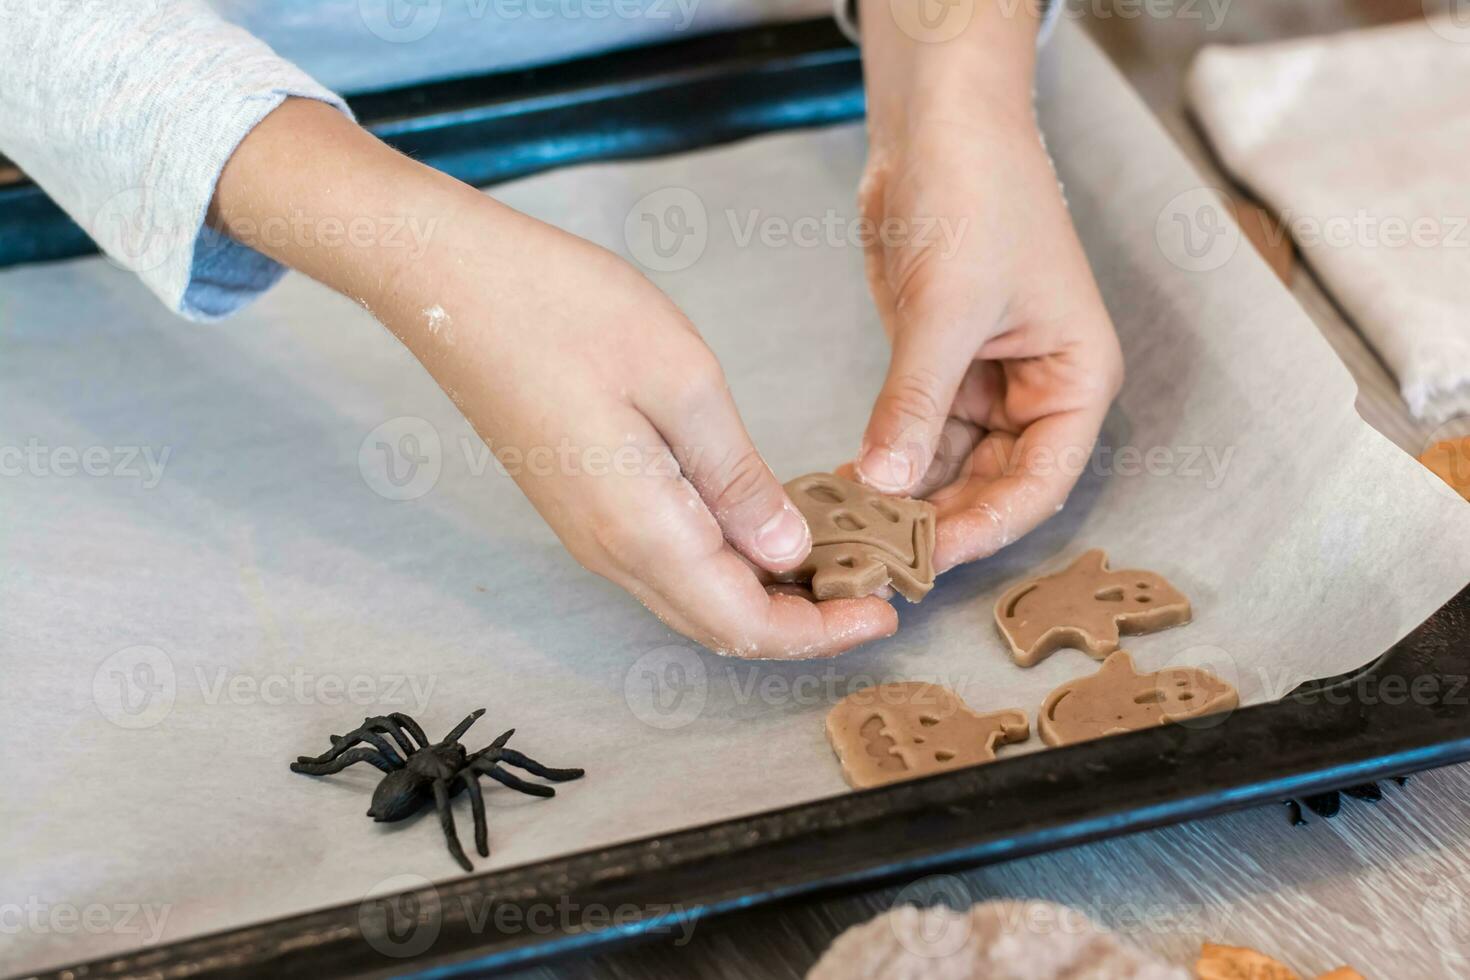 Preparing to celebrate halloween and preparing a treat. Children's hands lay raw halloween cookies on a baking sheet. Lifestyle photo